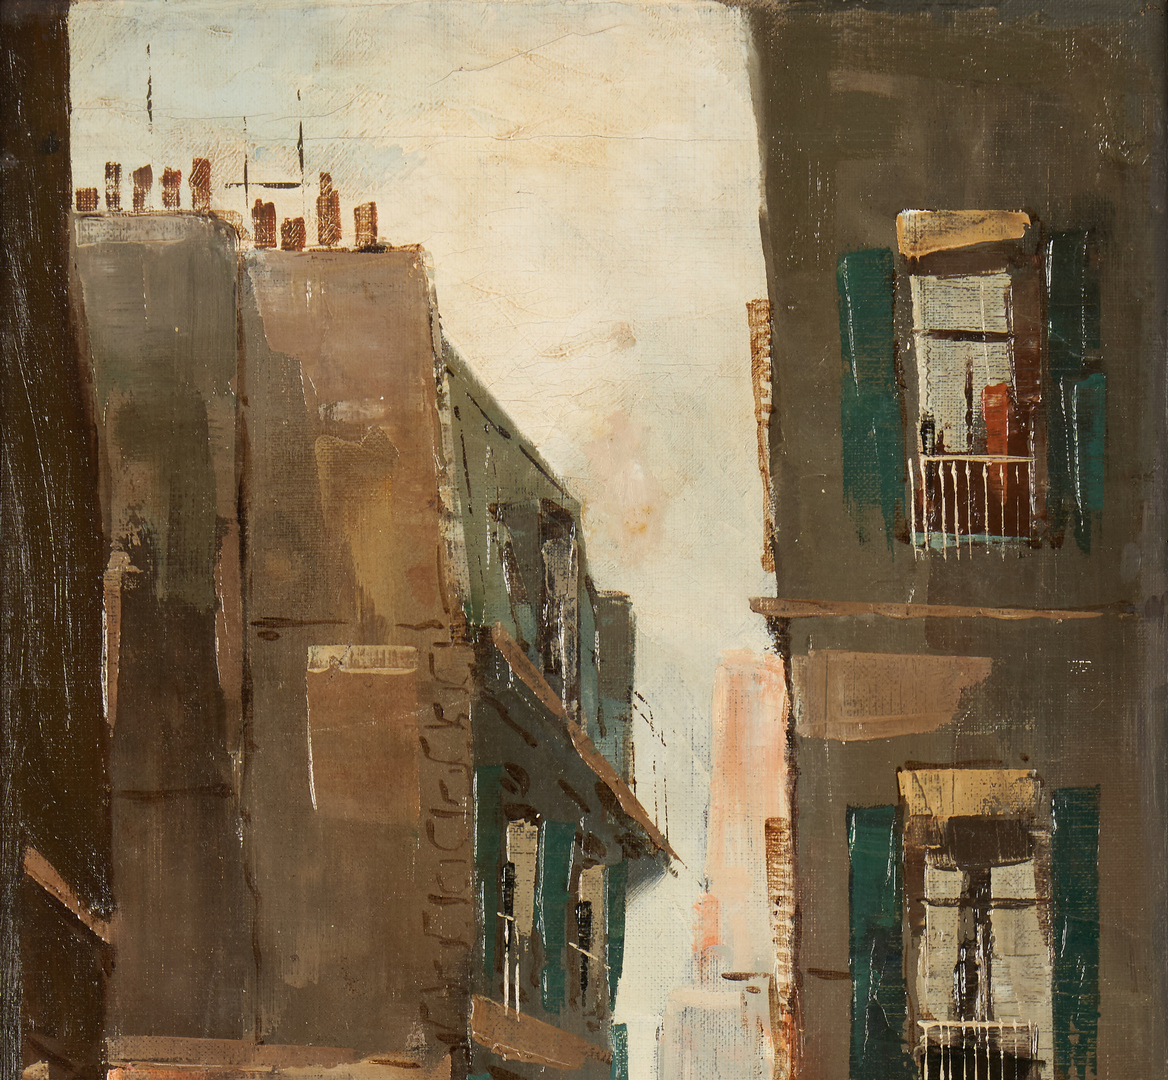 Lot 313: 2 French Street Scenes: Nicola Ortis Poucette and Max Moreau